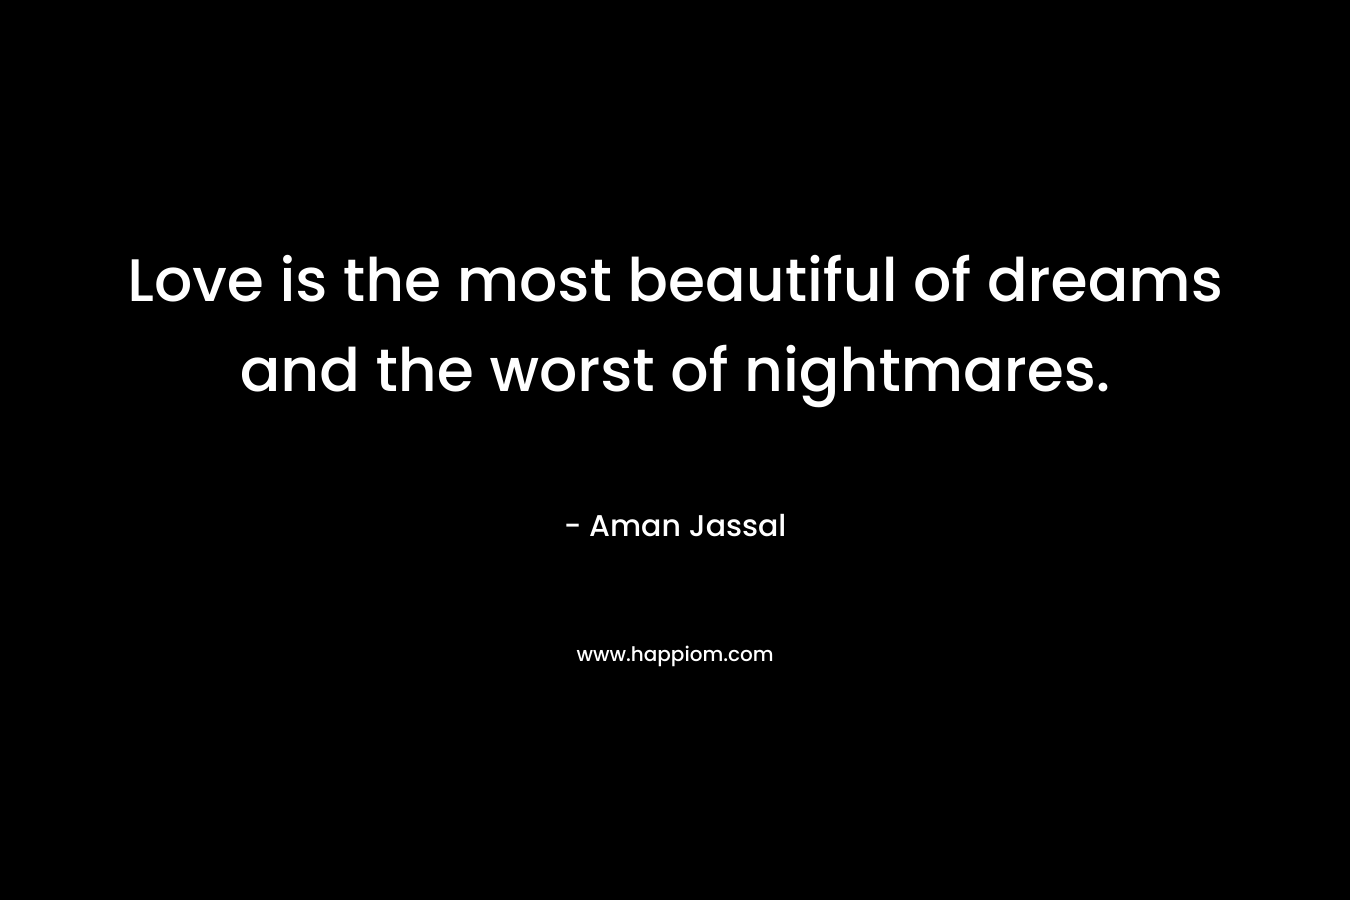 Love is the most beautiful of dreams and the worst of nightmares.